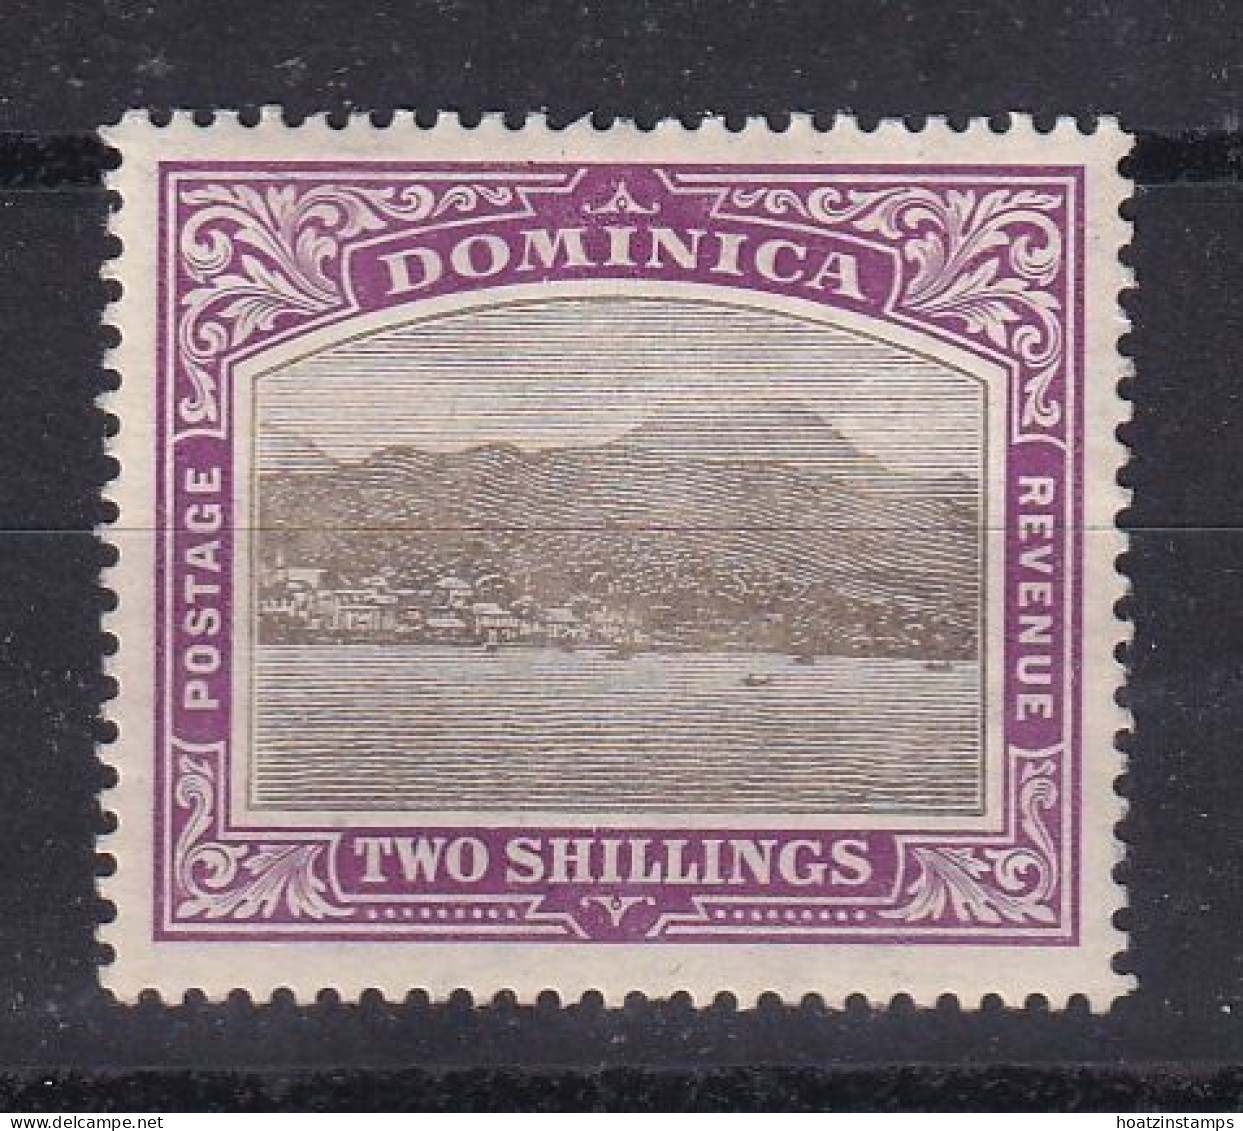 Dominica: 1908/20   Rouseau From The Sea    SG53b    2/-      MH - Dominica (...-1978)